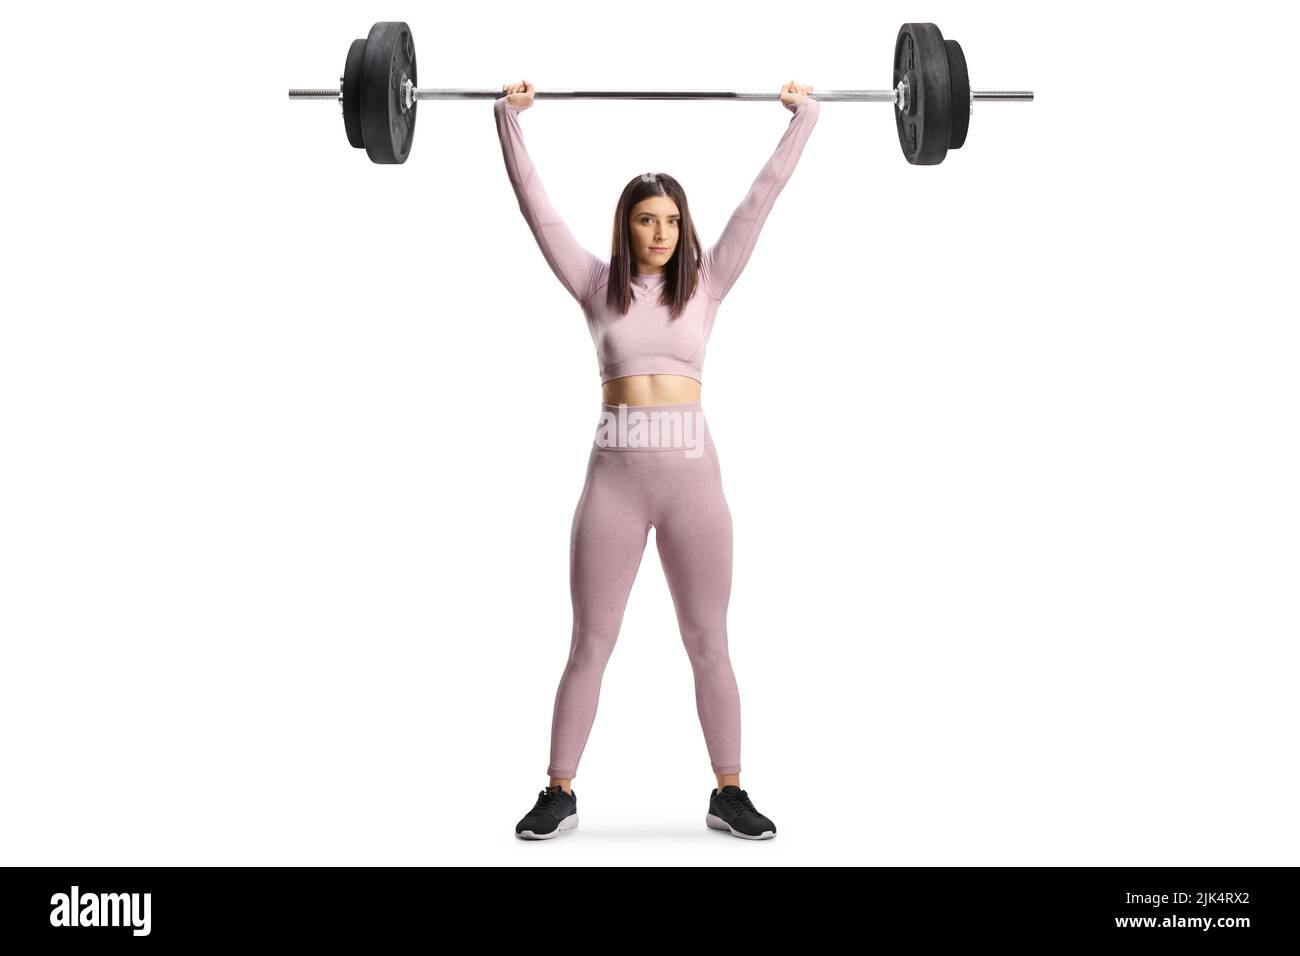 https://c8.alamy.com/comp/2JK4RX2/full-length-portrait-of-a-strong-young-woman-exercising-weight-lifting-isolated-on-white-background-2JK4RX2.jpg